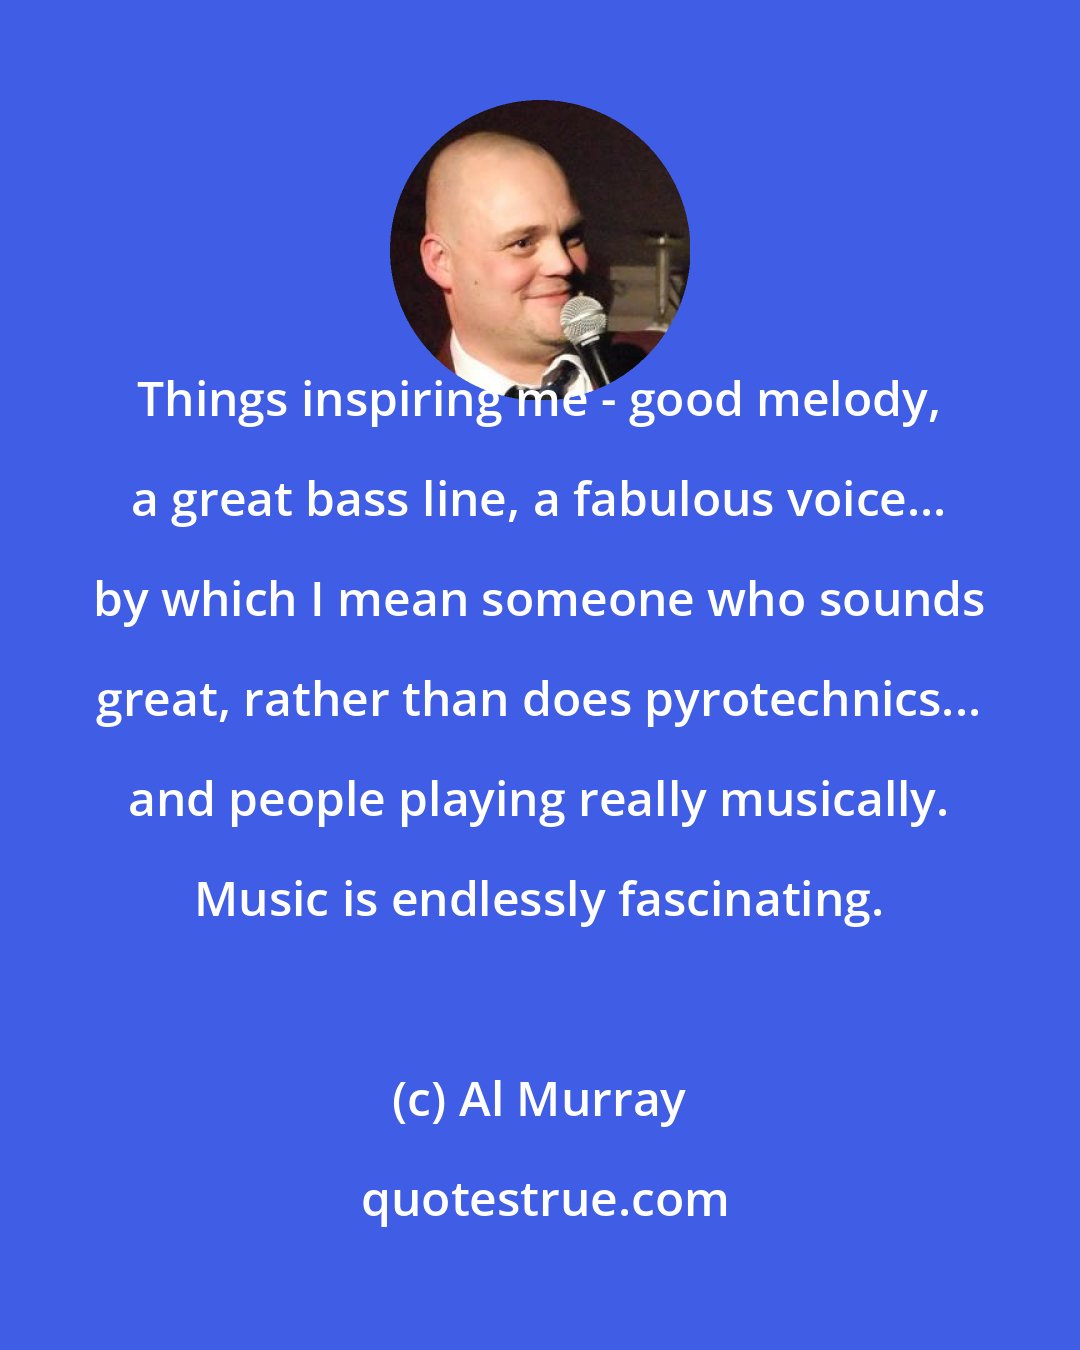 Al Murray: Things inspiring me - good melody, a great bass line, a fabulous voice... by which I mean someone who sounds great, rather than does pyrotechnics... and people playing really musically. Music is endlessly fascinating.